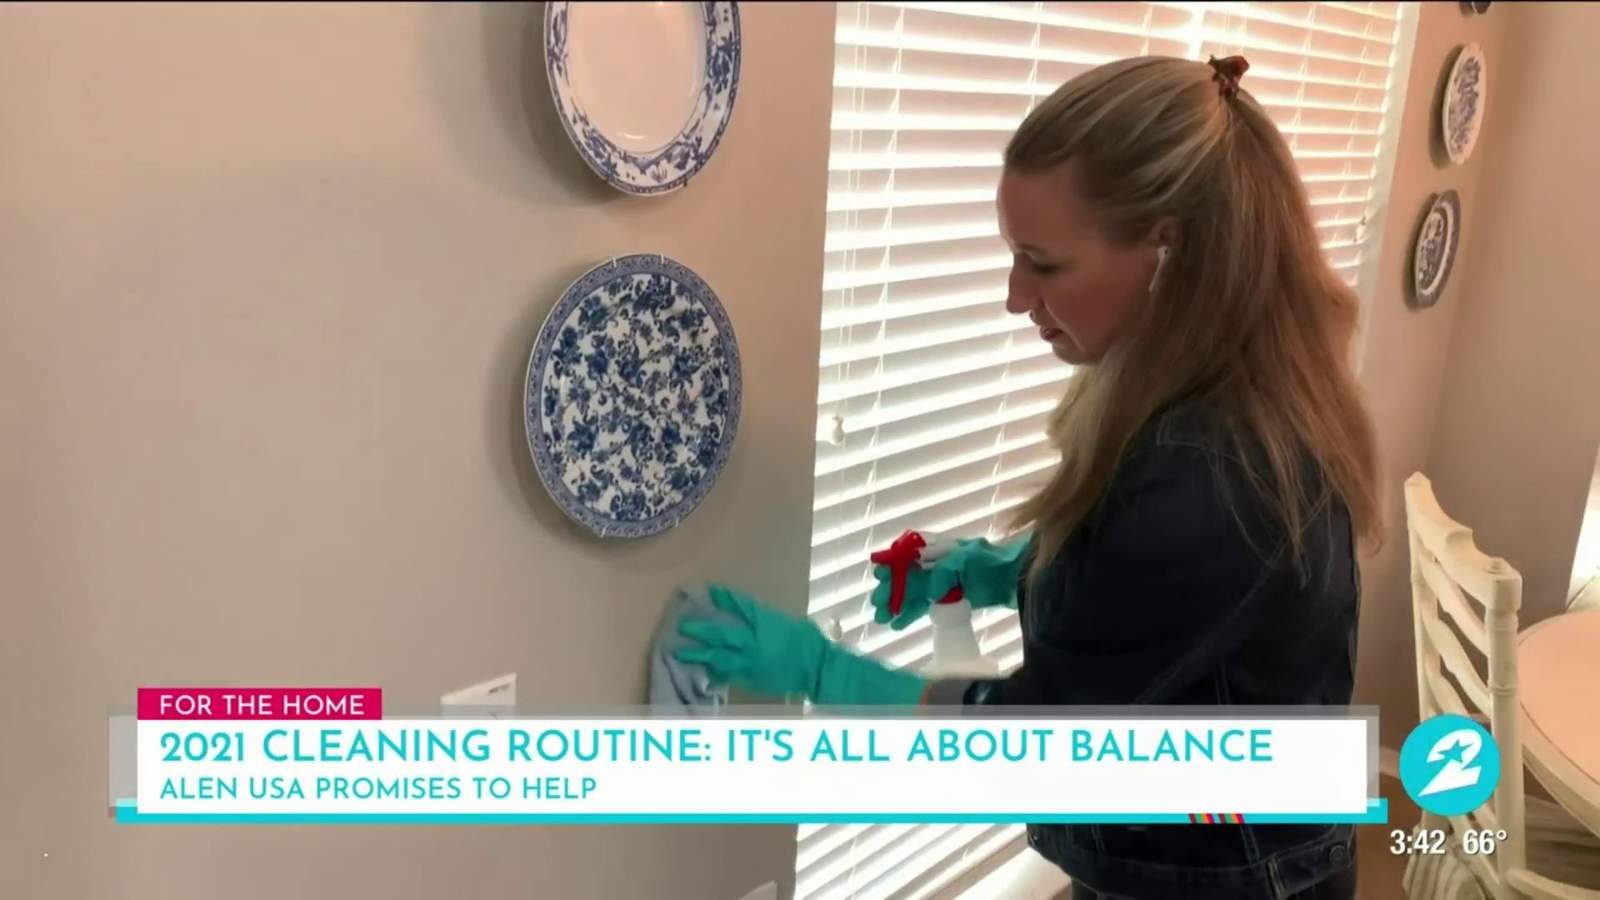 2021 Cleaning Routine: It’s All About Balance